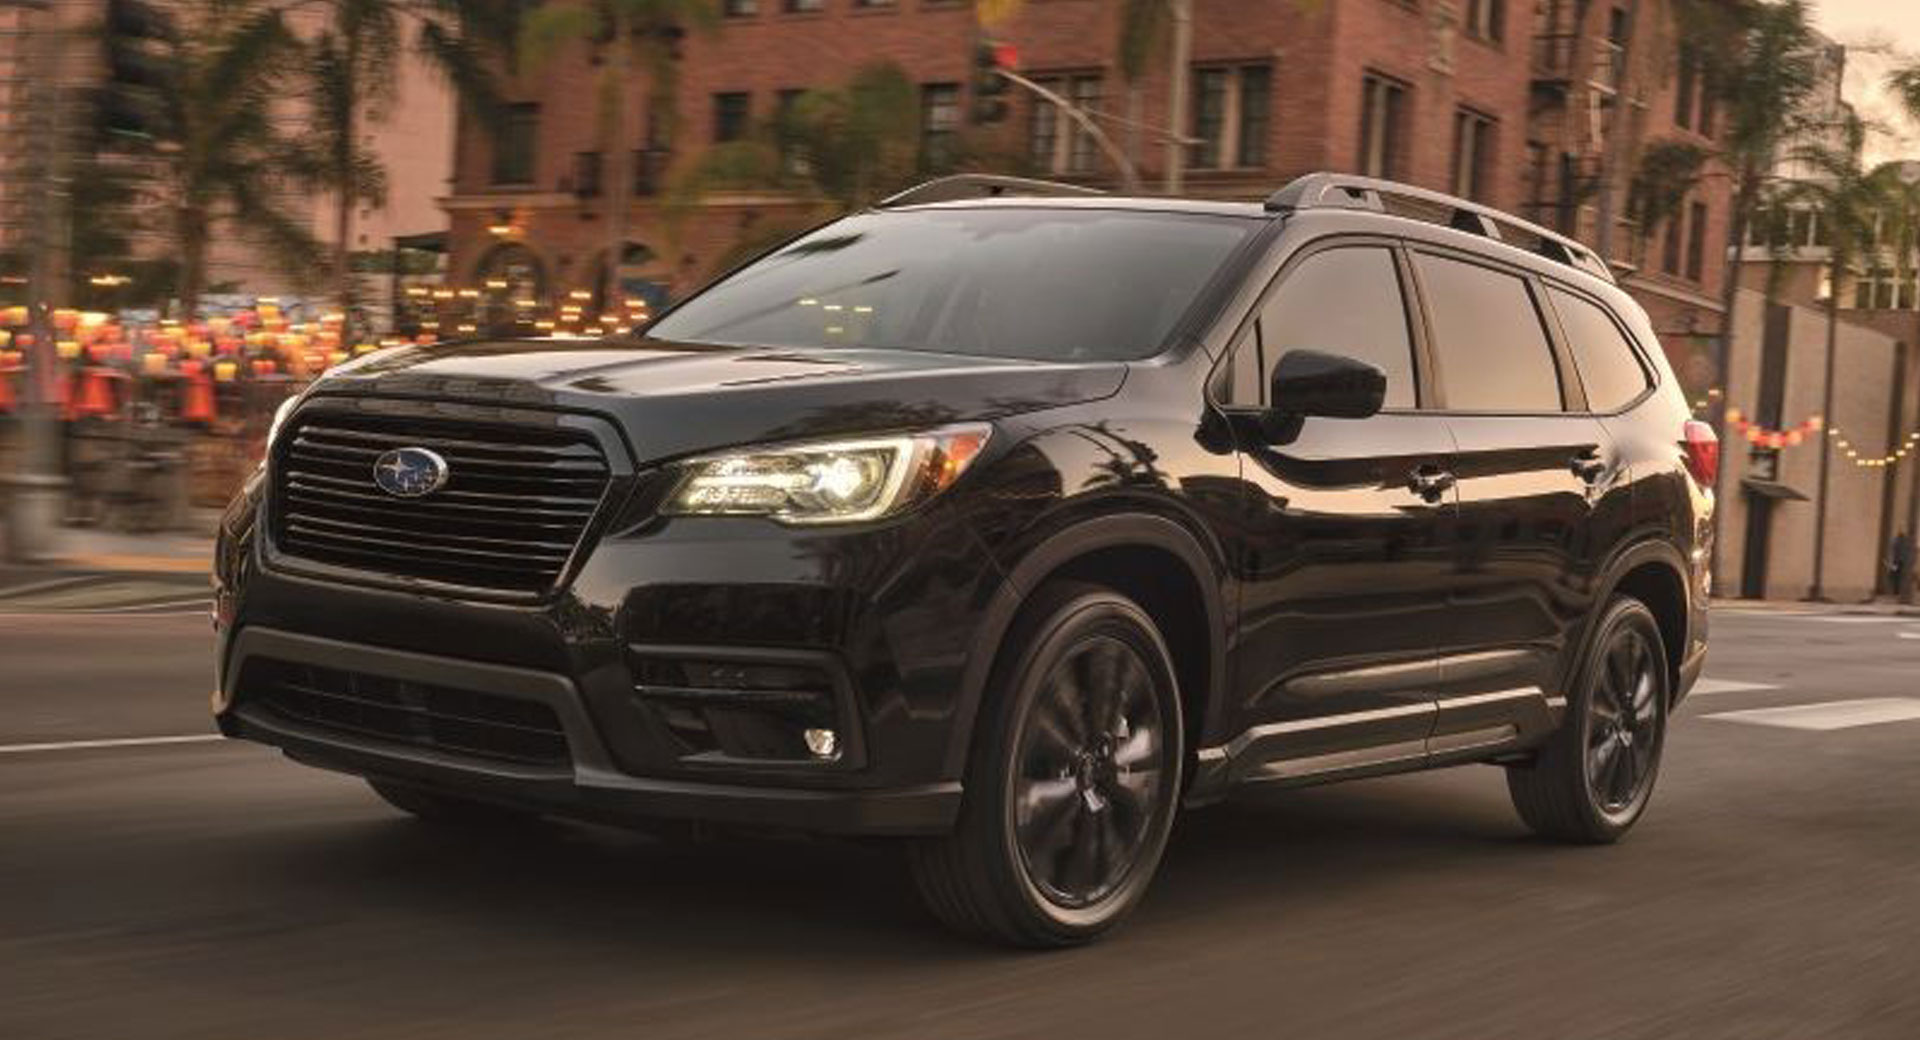 2022 Subaru Ascent Gets Onyx Edition Because There Aren’t Enough